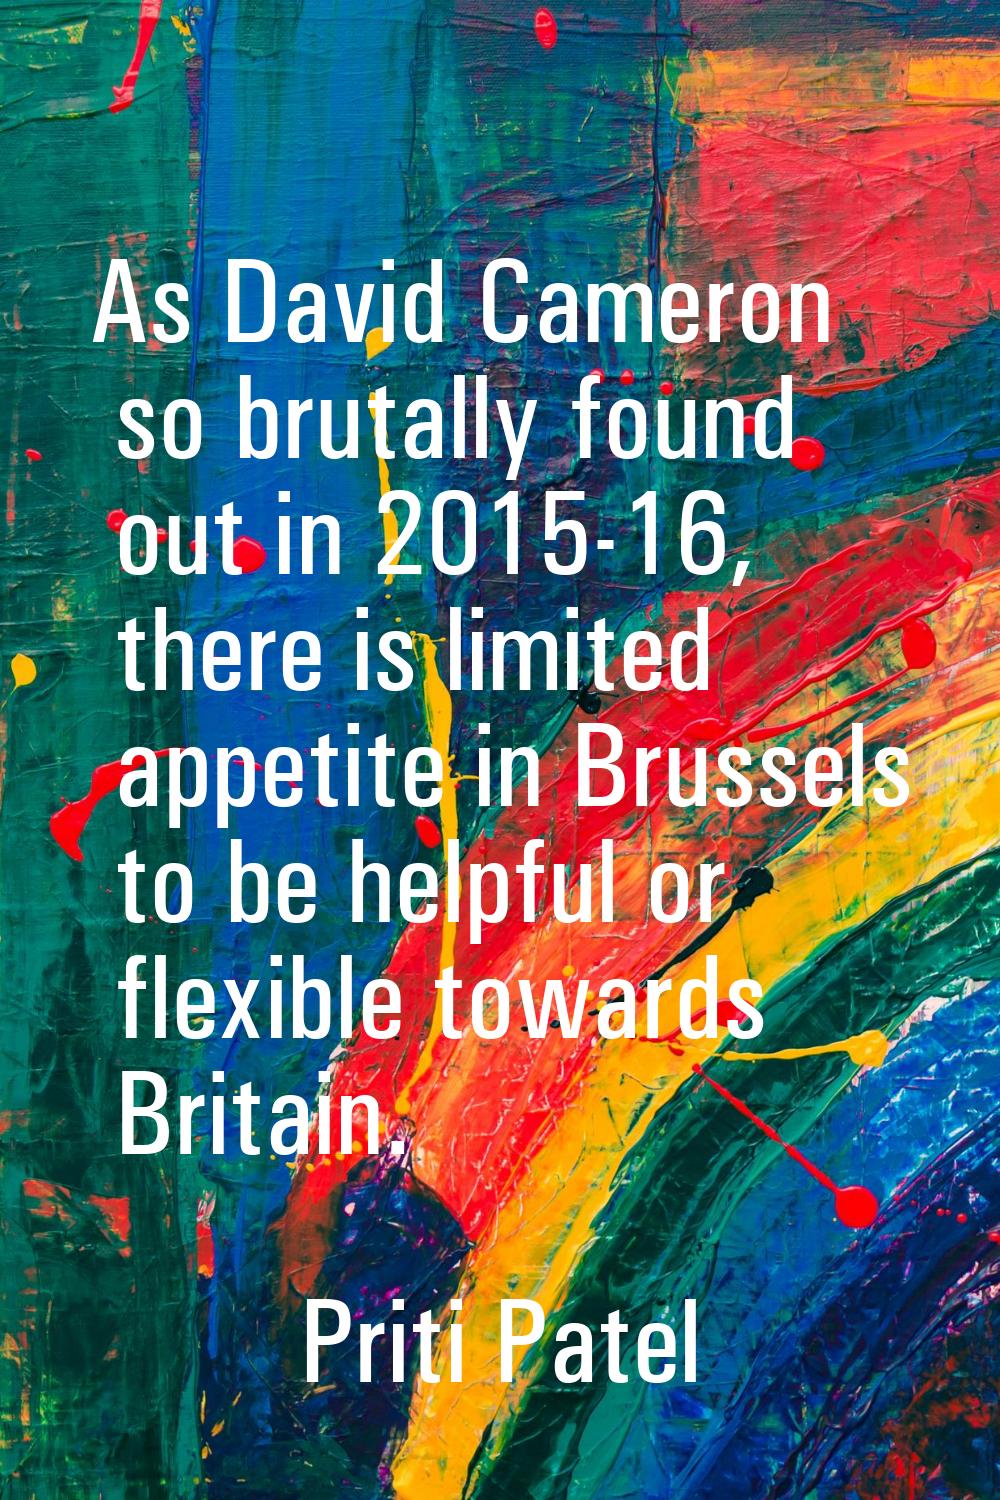 As David Cameron so brutally found out in 2015-16, there is limited appetite in Brussels to be help